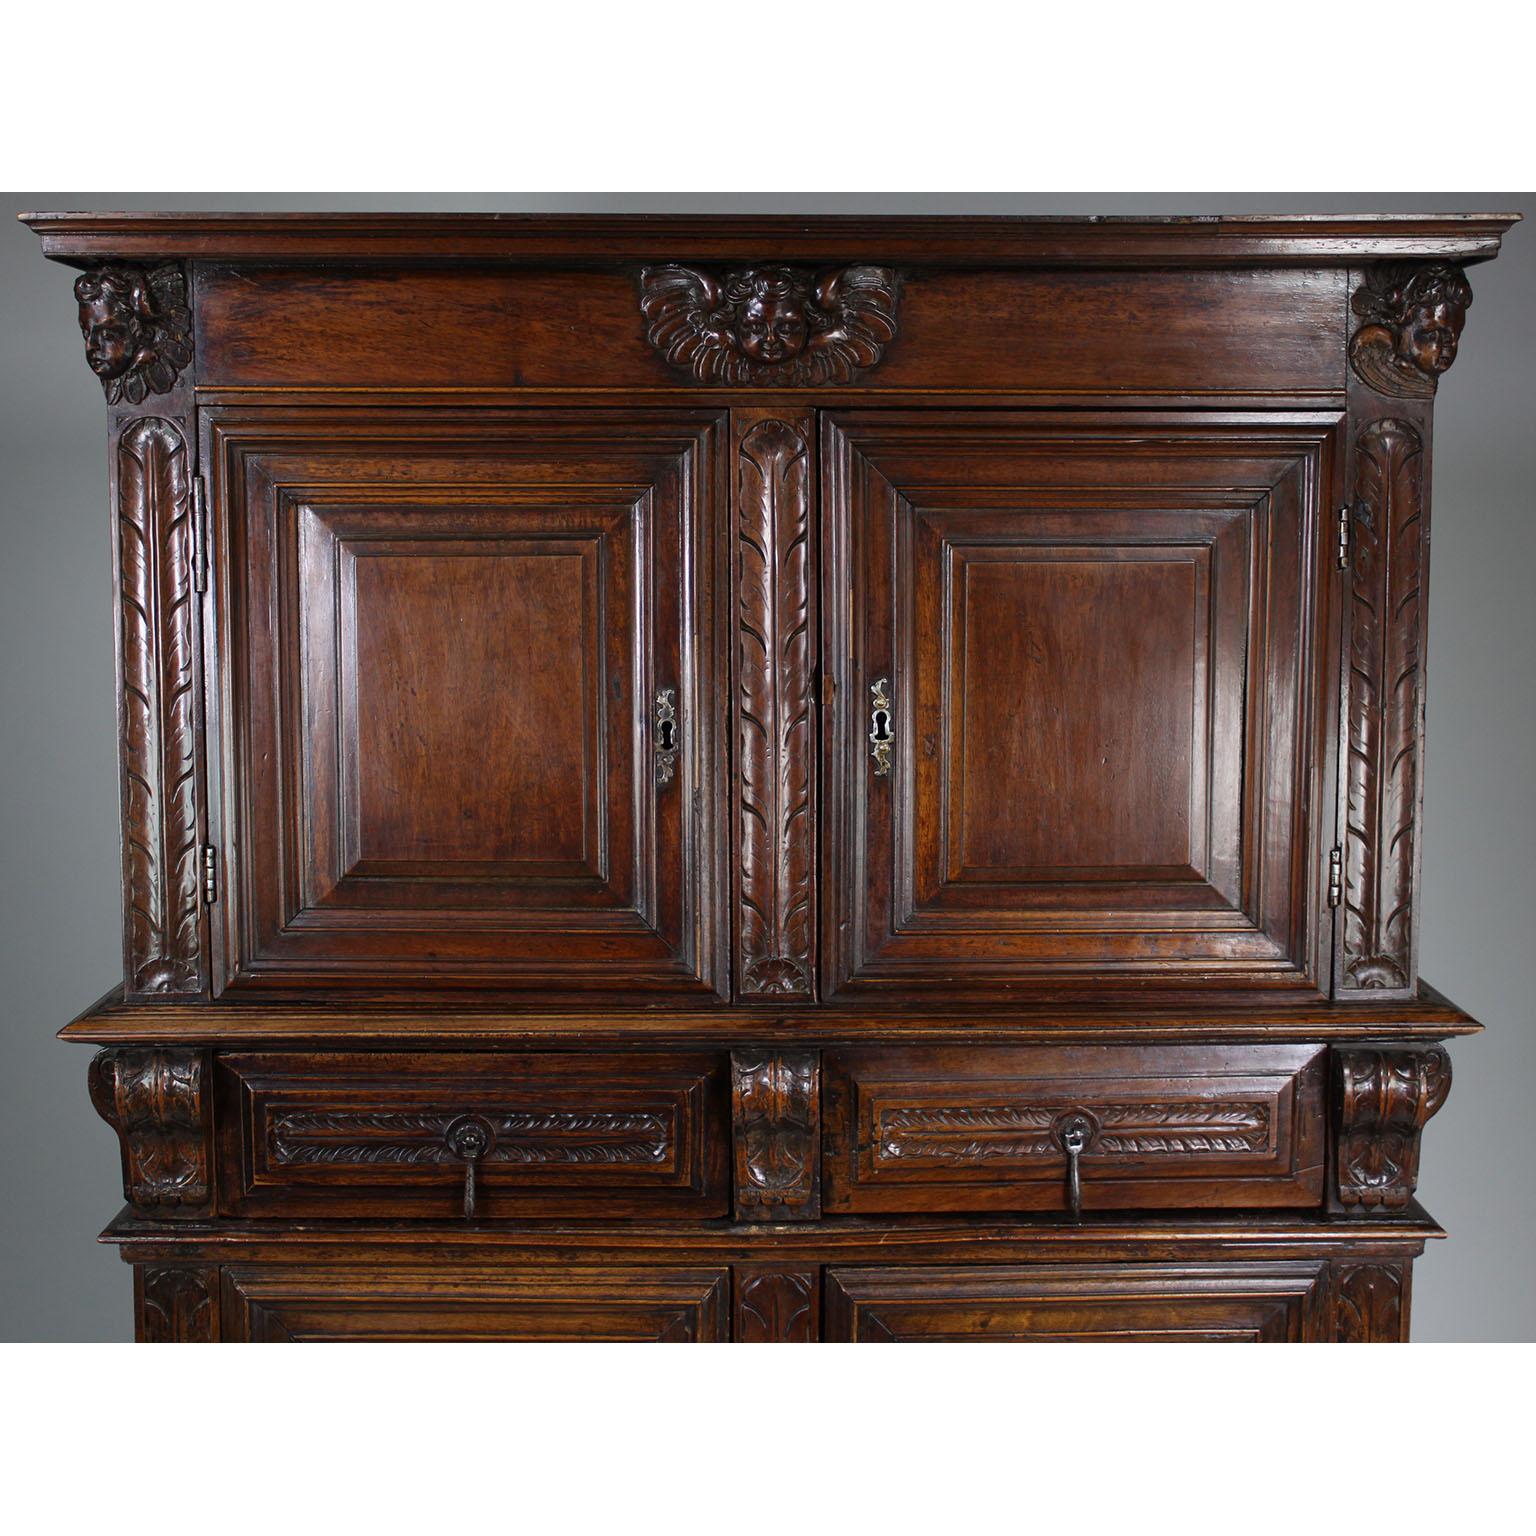 A 17th-18th Century French/Italian Renaissance Walnut Carved Credenza Cabinet In Fair Condition For Sale In Los Angeles, CA